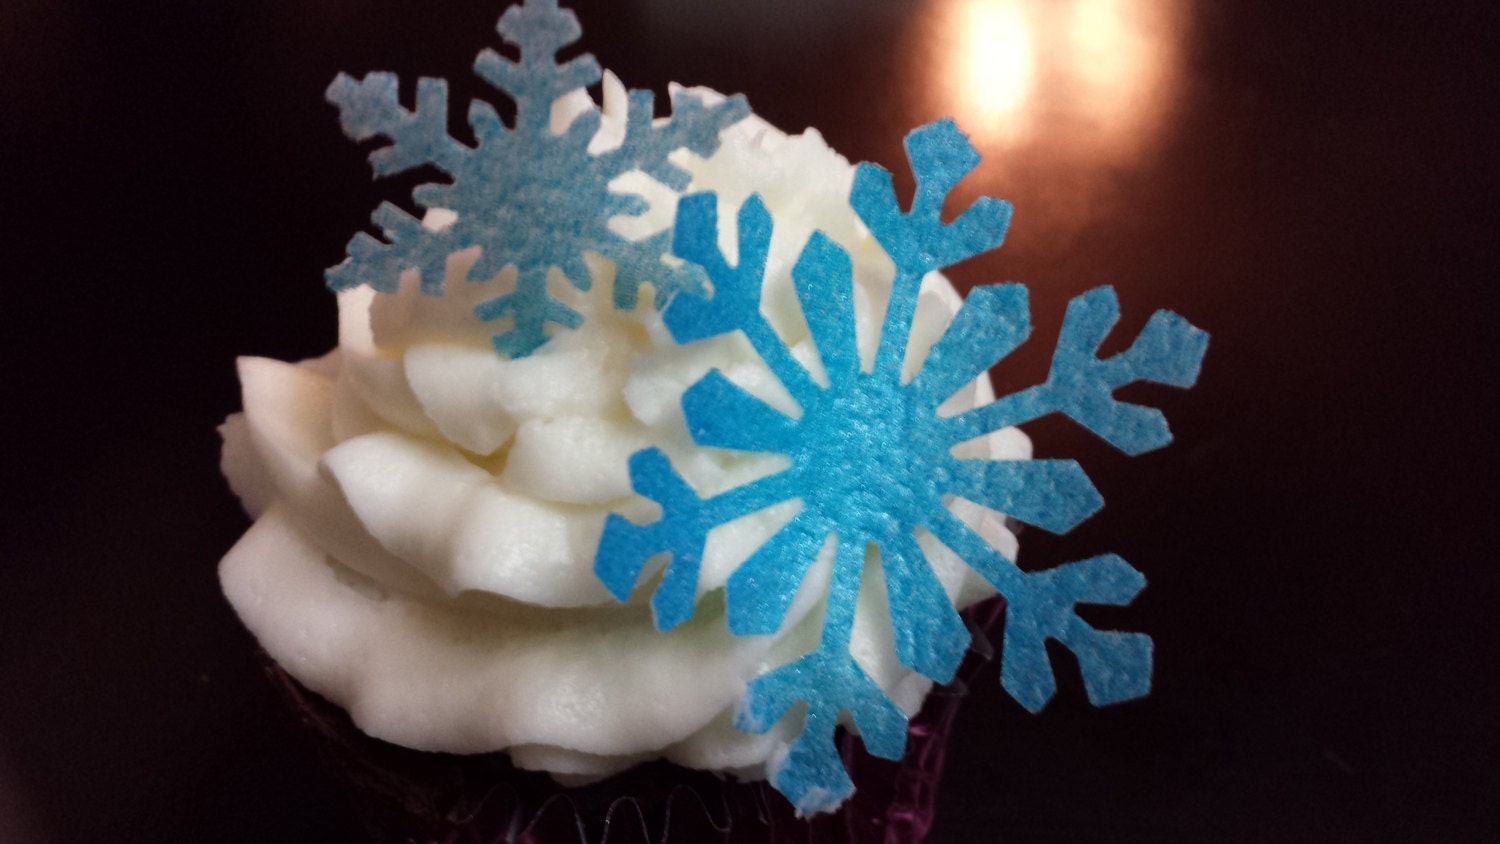 White Snowflake Assortment Edible Sugar Decoration Toppers for